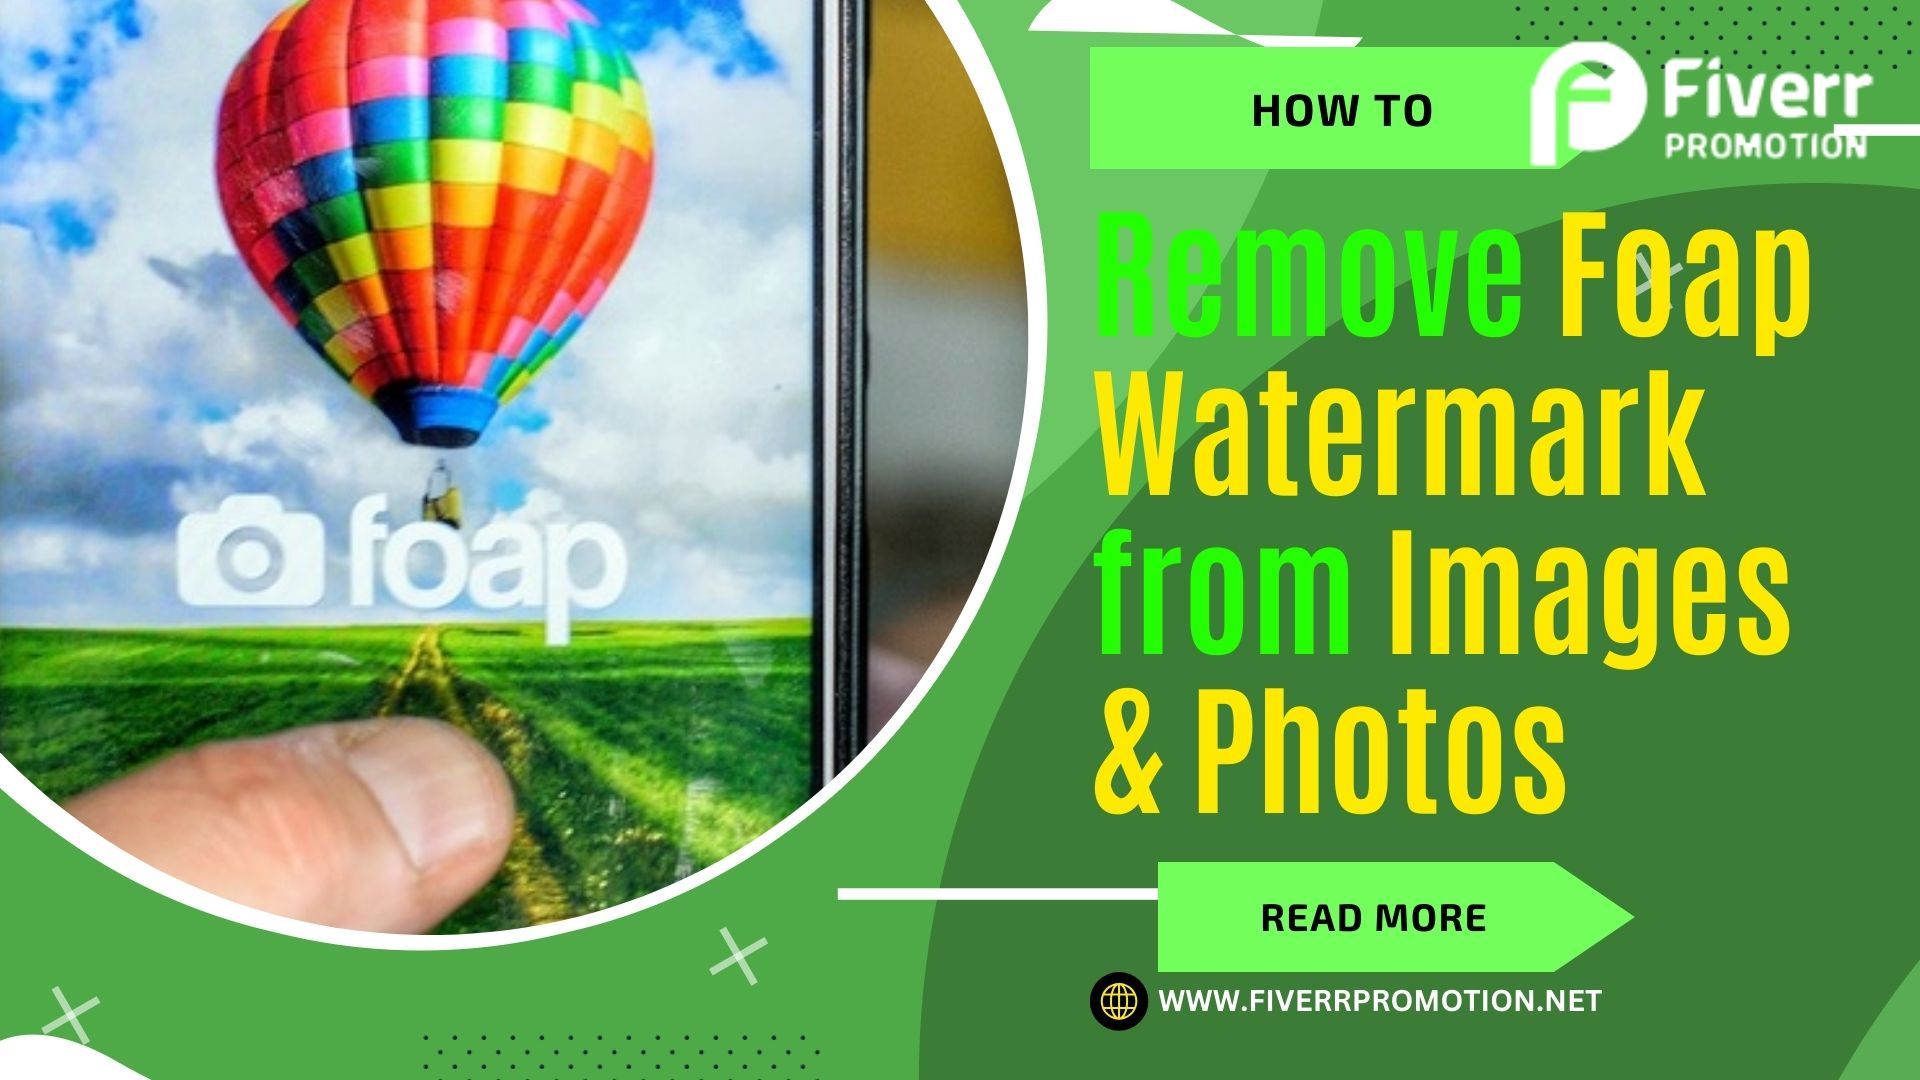 How to Remove Foap Watermark from Images & Photos